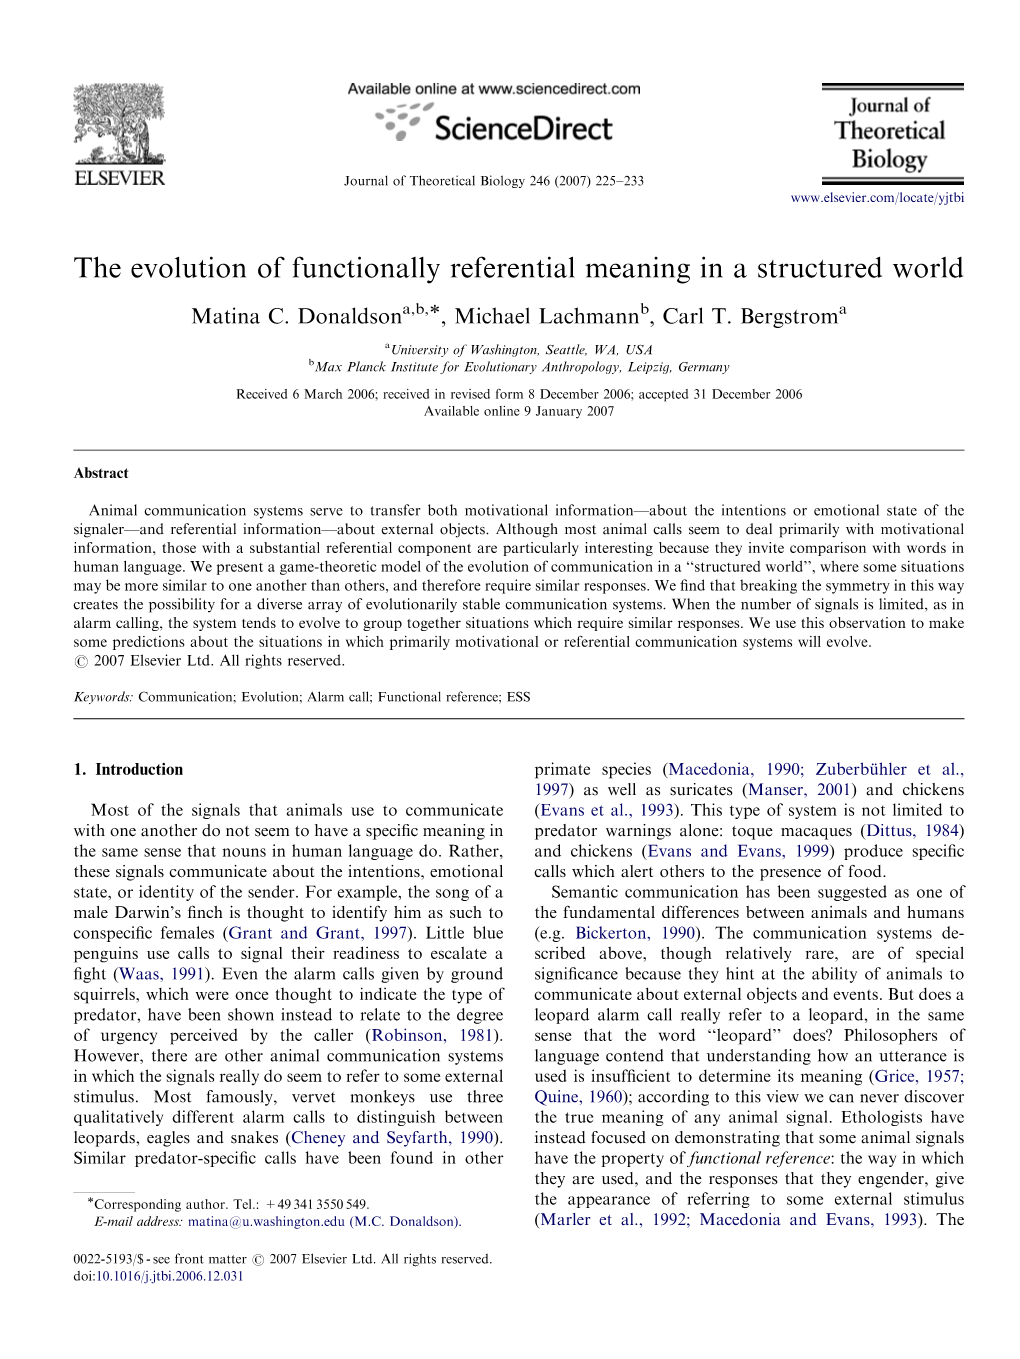 The Evolution of Functionally Referential Meaning in a Structured World